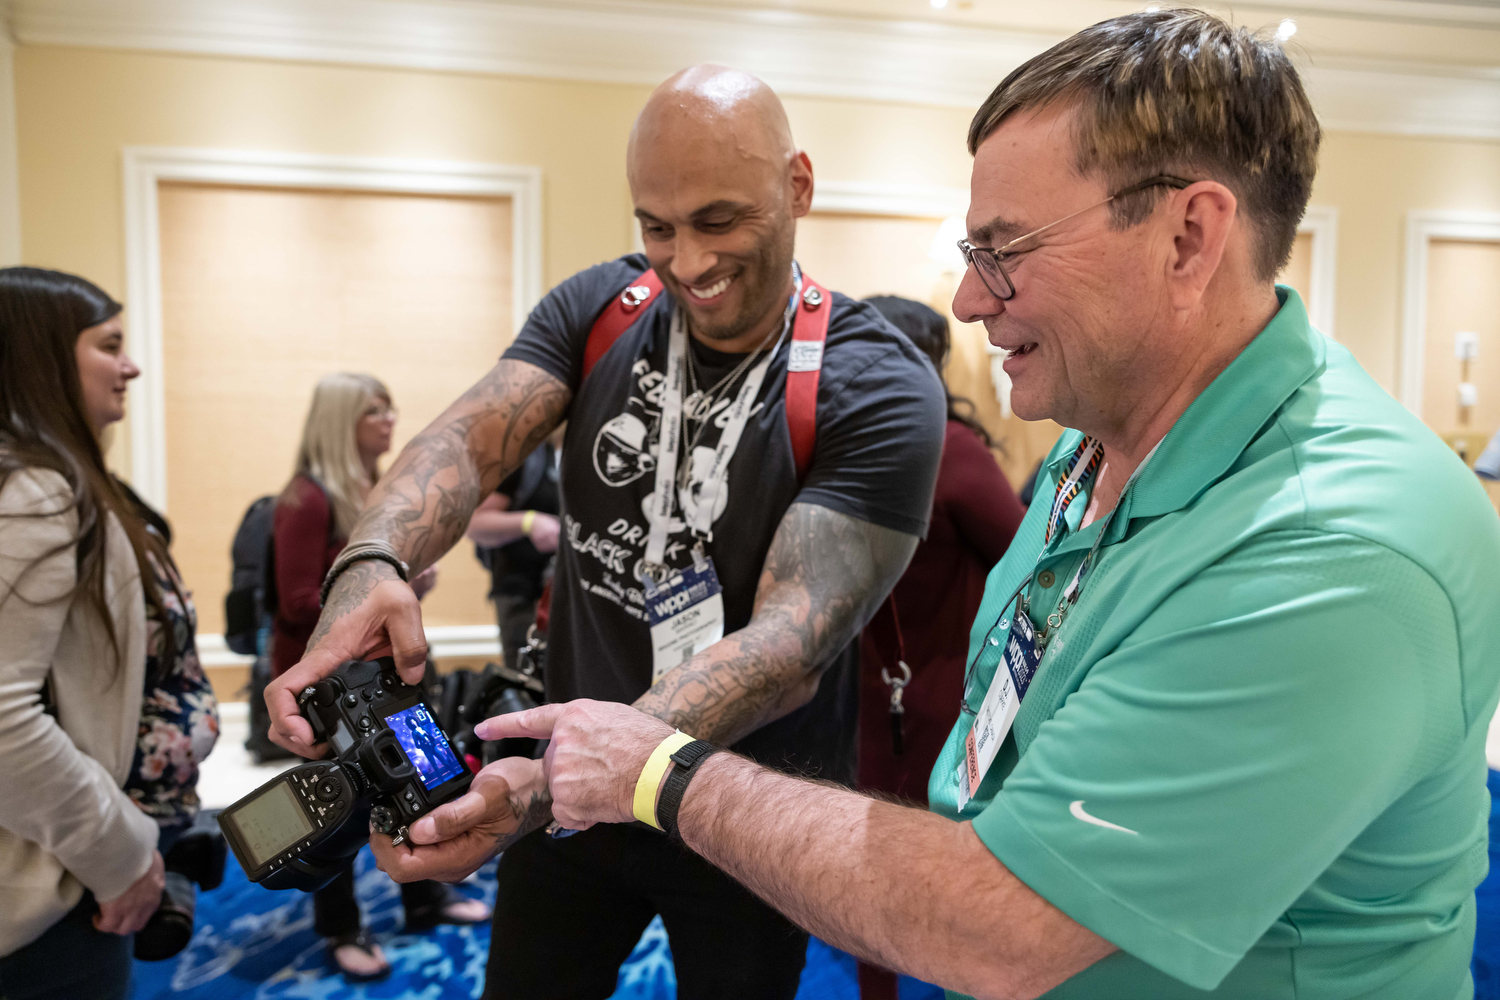 WPPI attendees were able to learn from world-class instructors and enjoy a few laughs with colleagues.